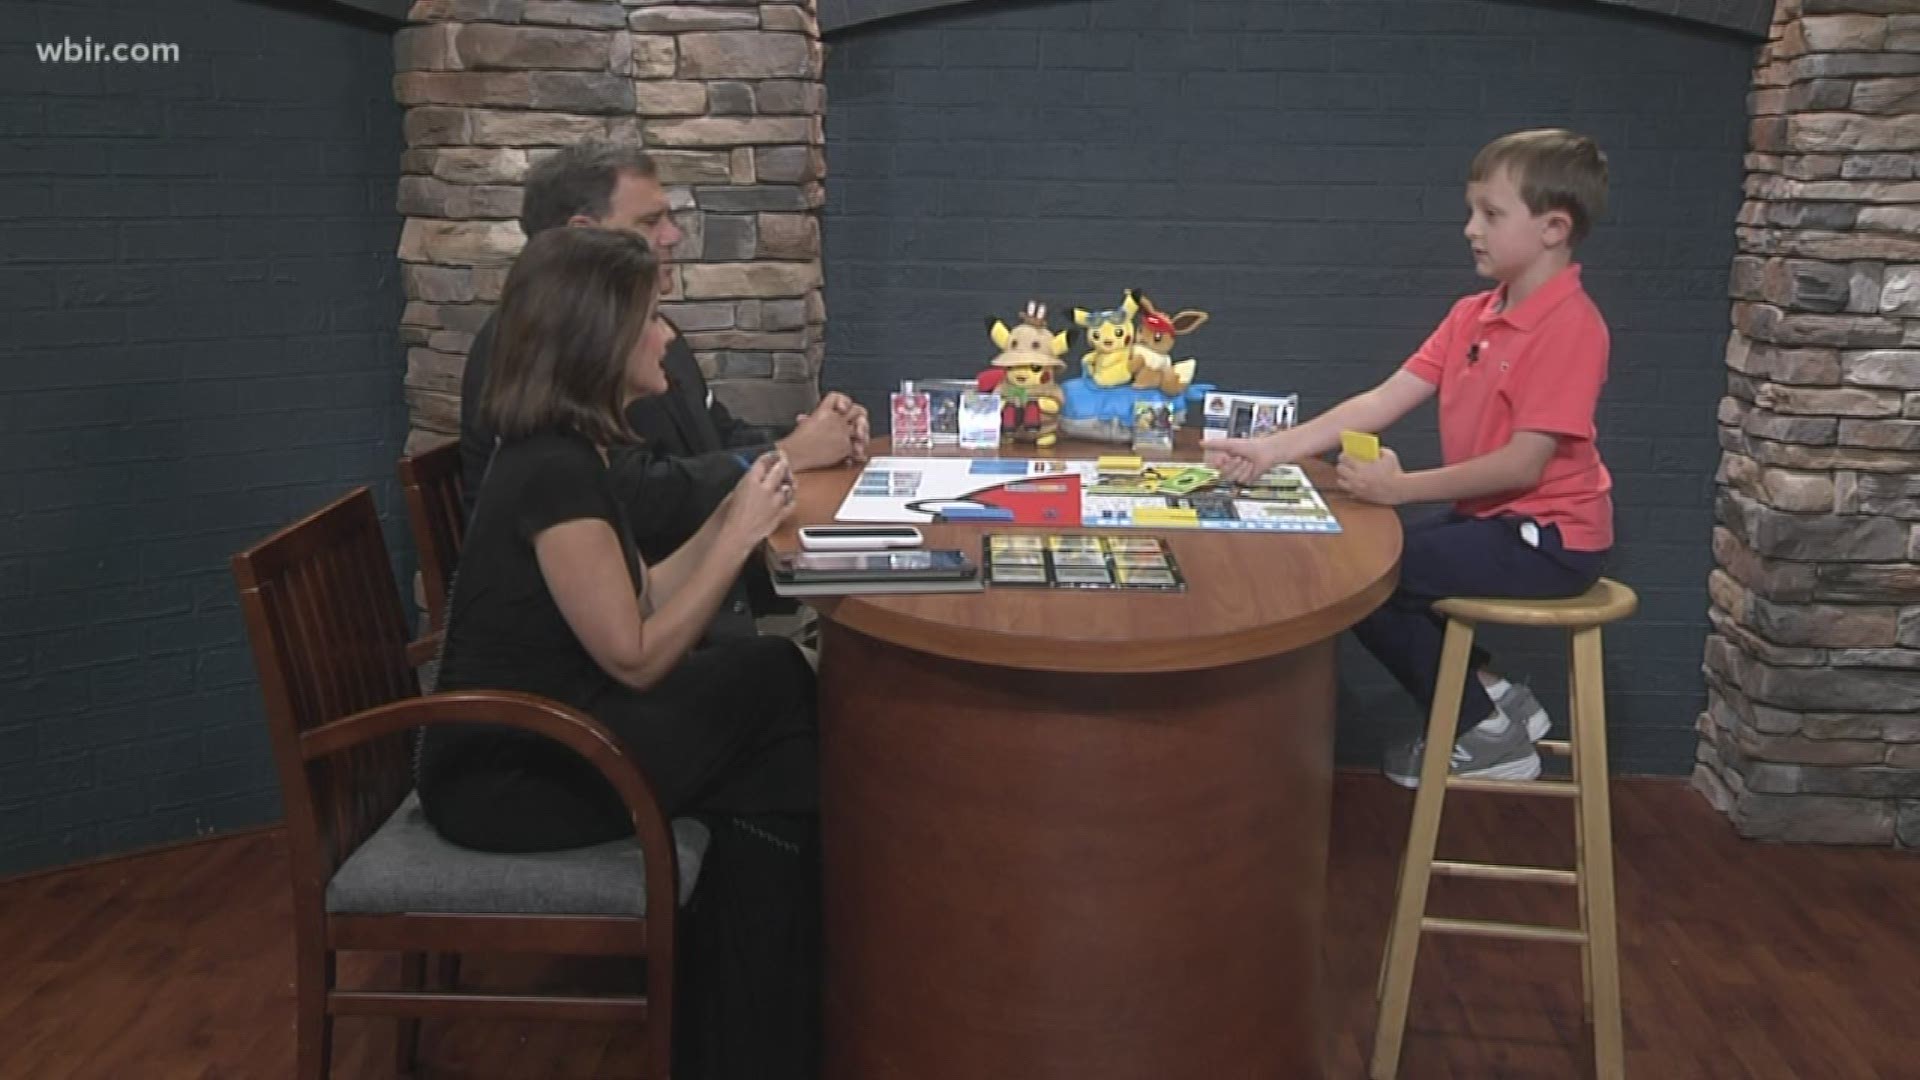 Jackson Sutton competed at the World Pokemon championship over the summer. Today he explains the card game to Russell and Beth. Well, he tried at least. Visit our Junior Anchor page if your child would like to be a Jr. Anchor. Aug. 27, 2019-4pm.